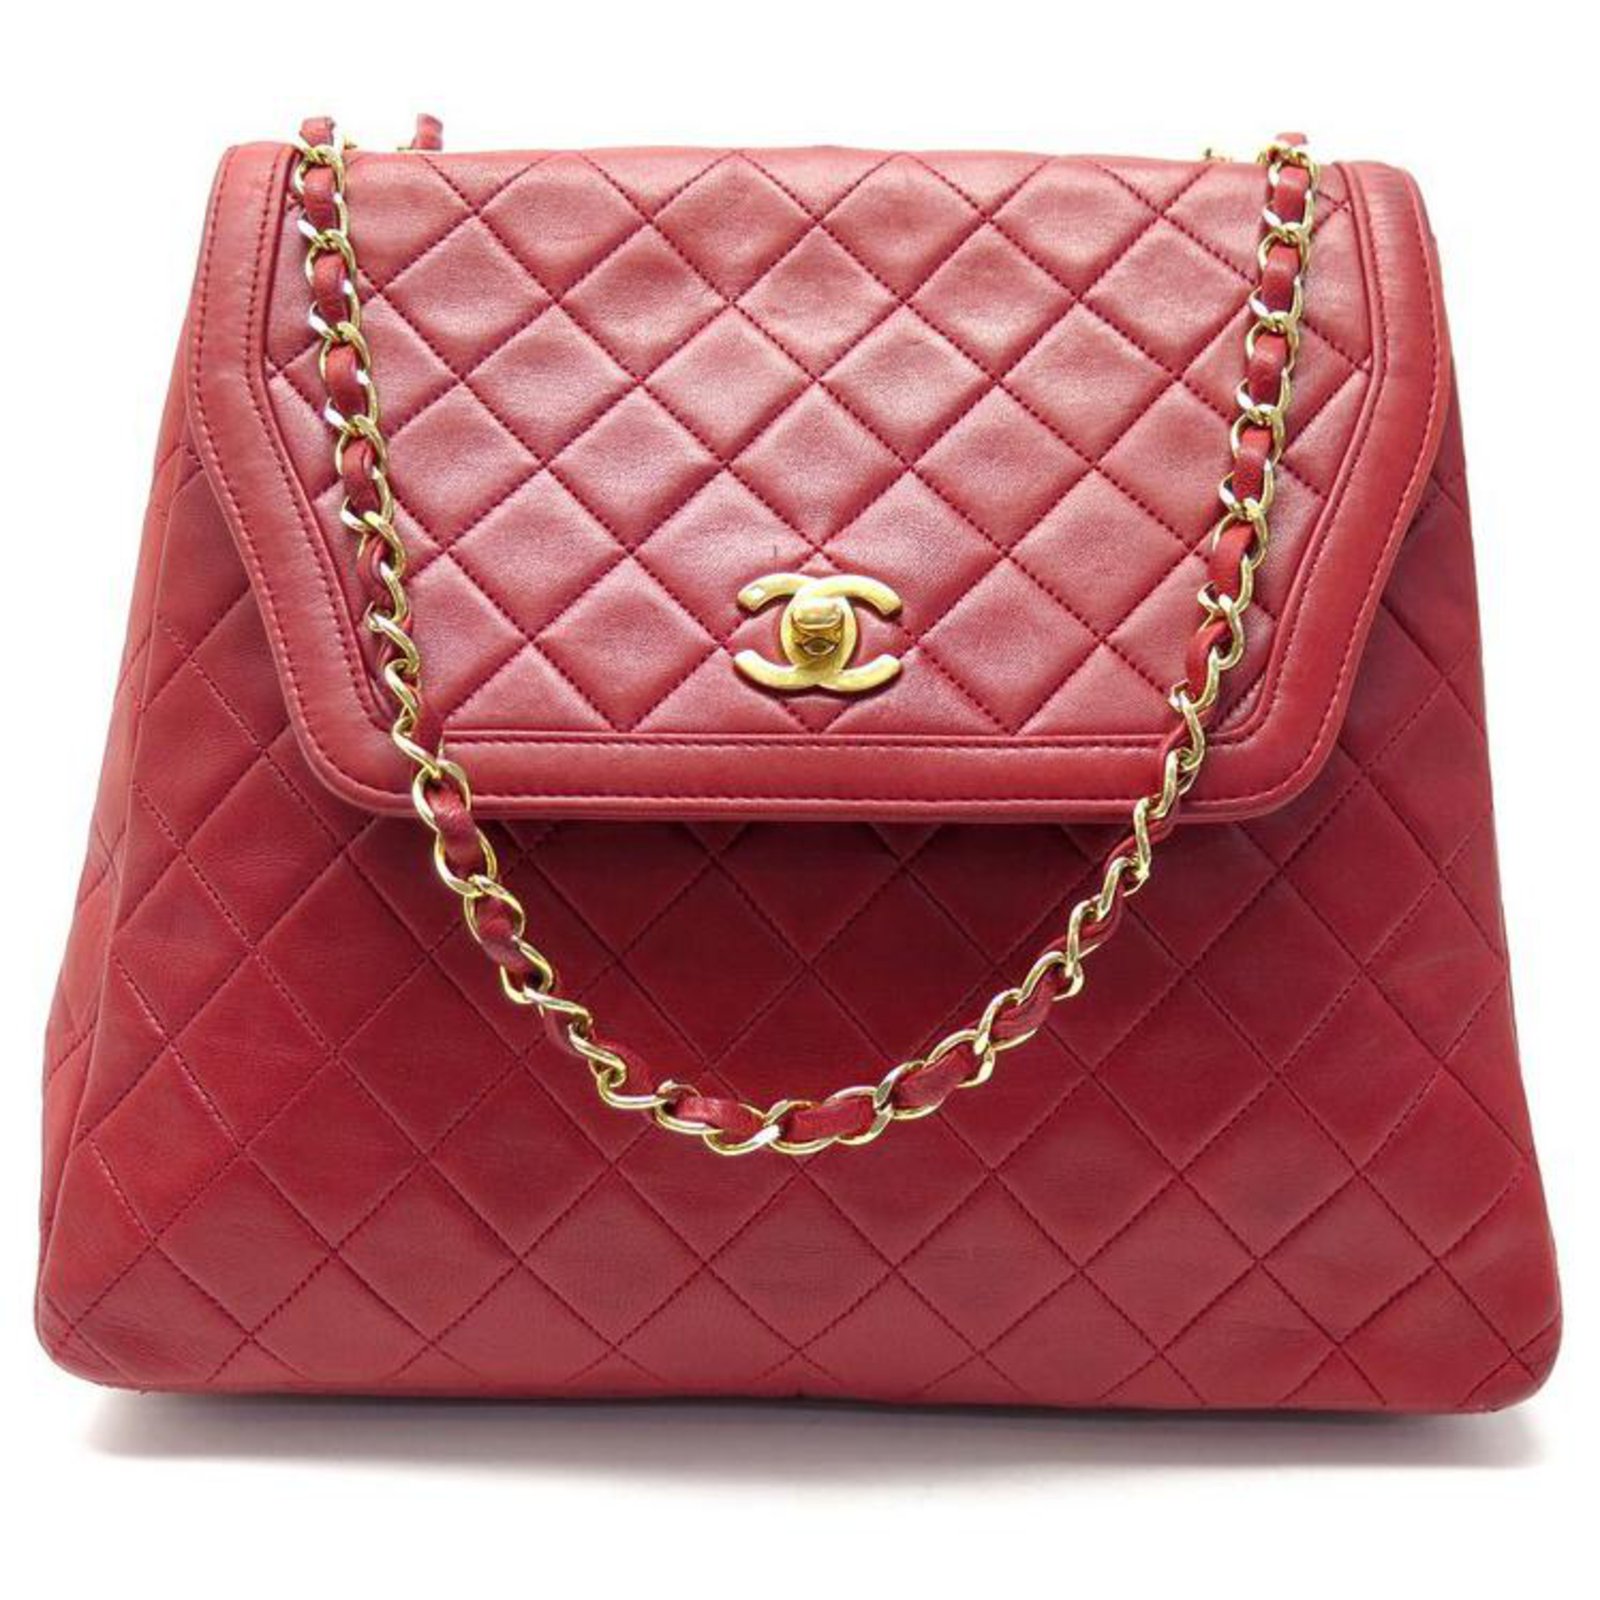 VINTAGE HAND BAG CHANEL TIMELESS TRAPEZE BANDOULIERE RED LEATHER